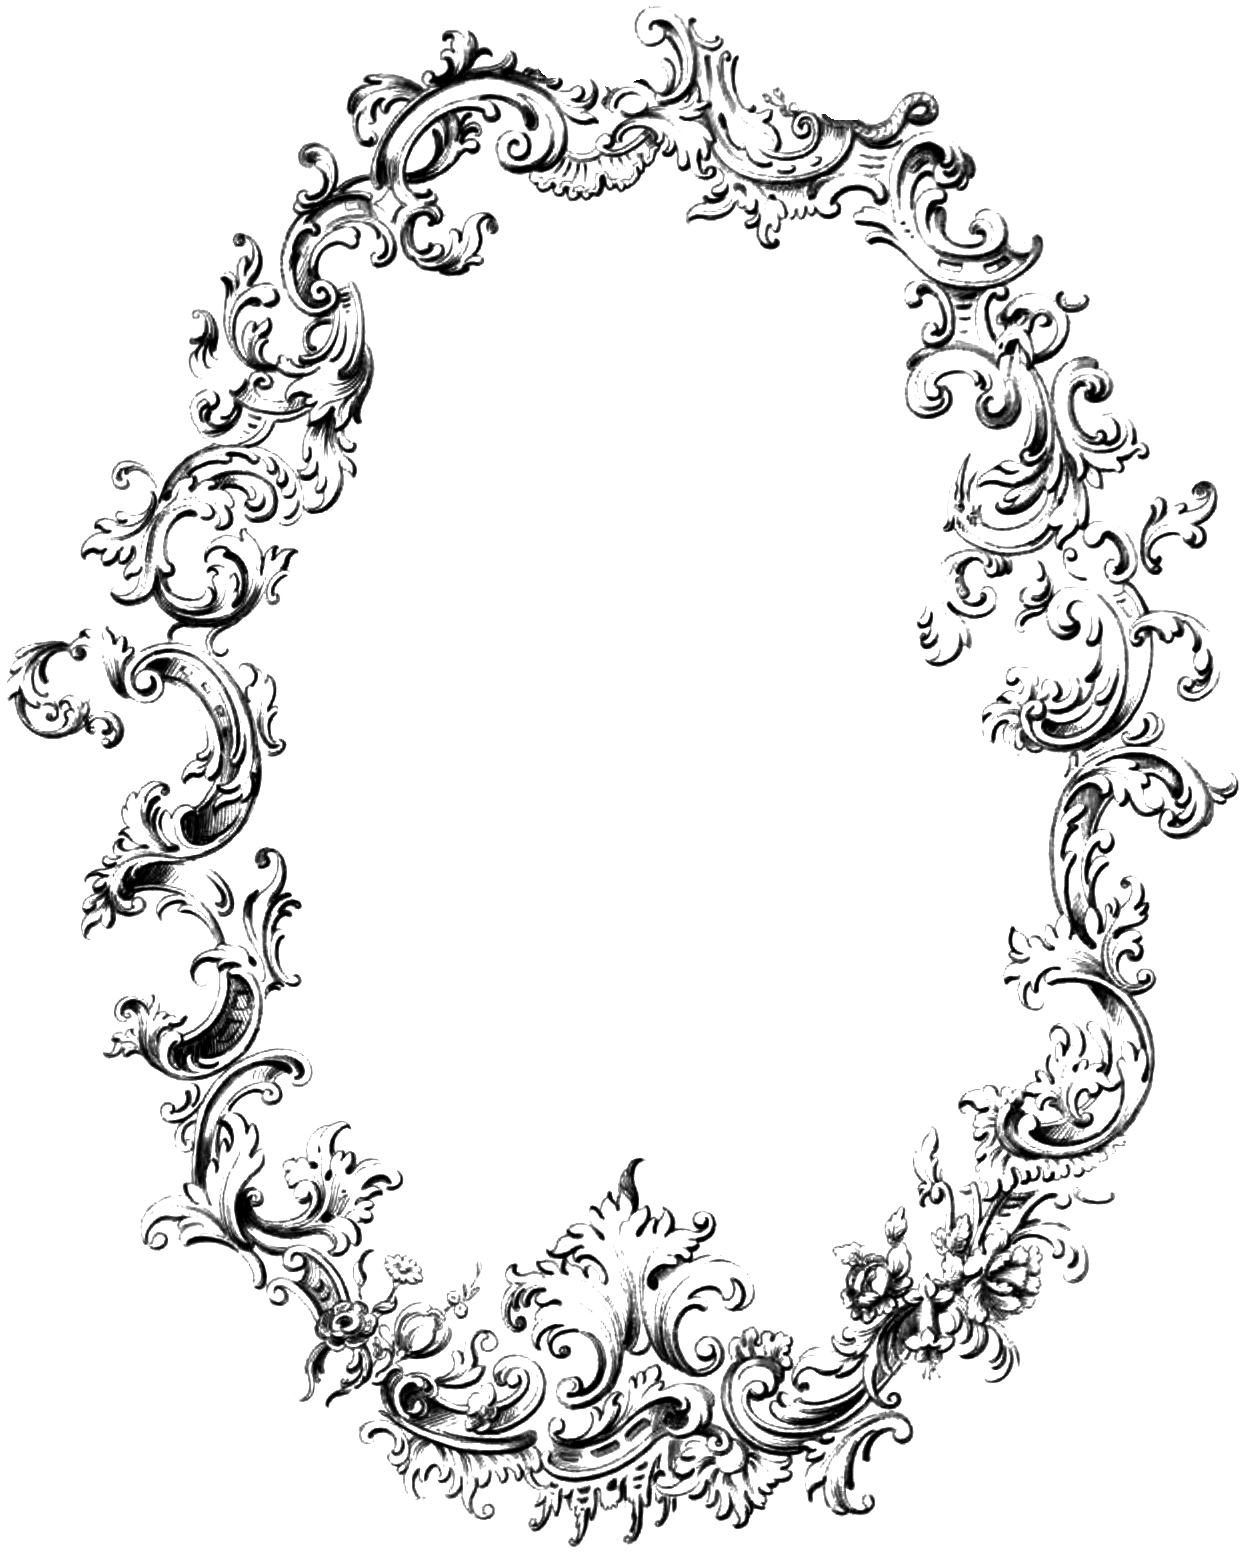 Free Fancy Frame Vintage Clip Art Image | Oh So Nifty Vintage Graphics